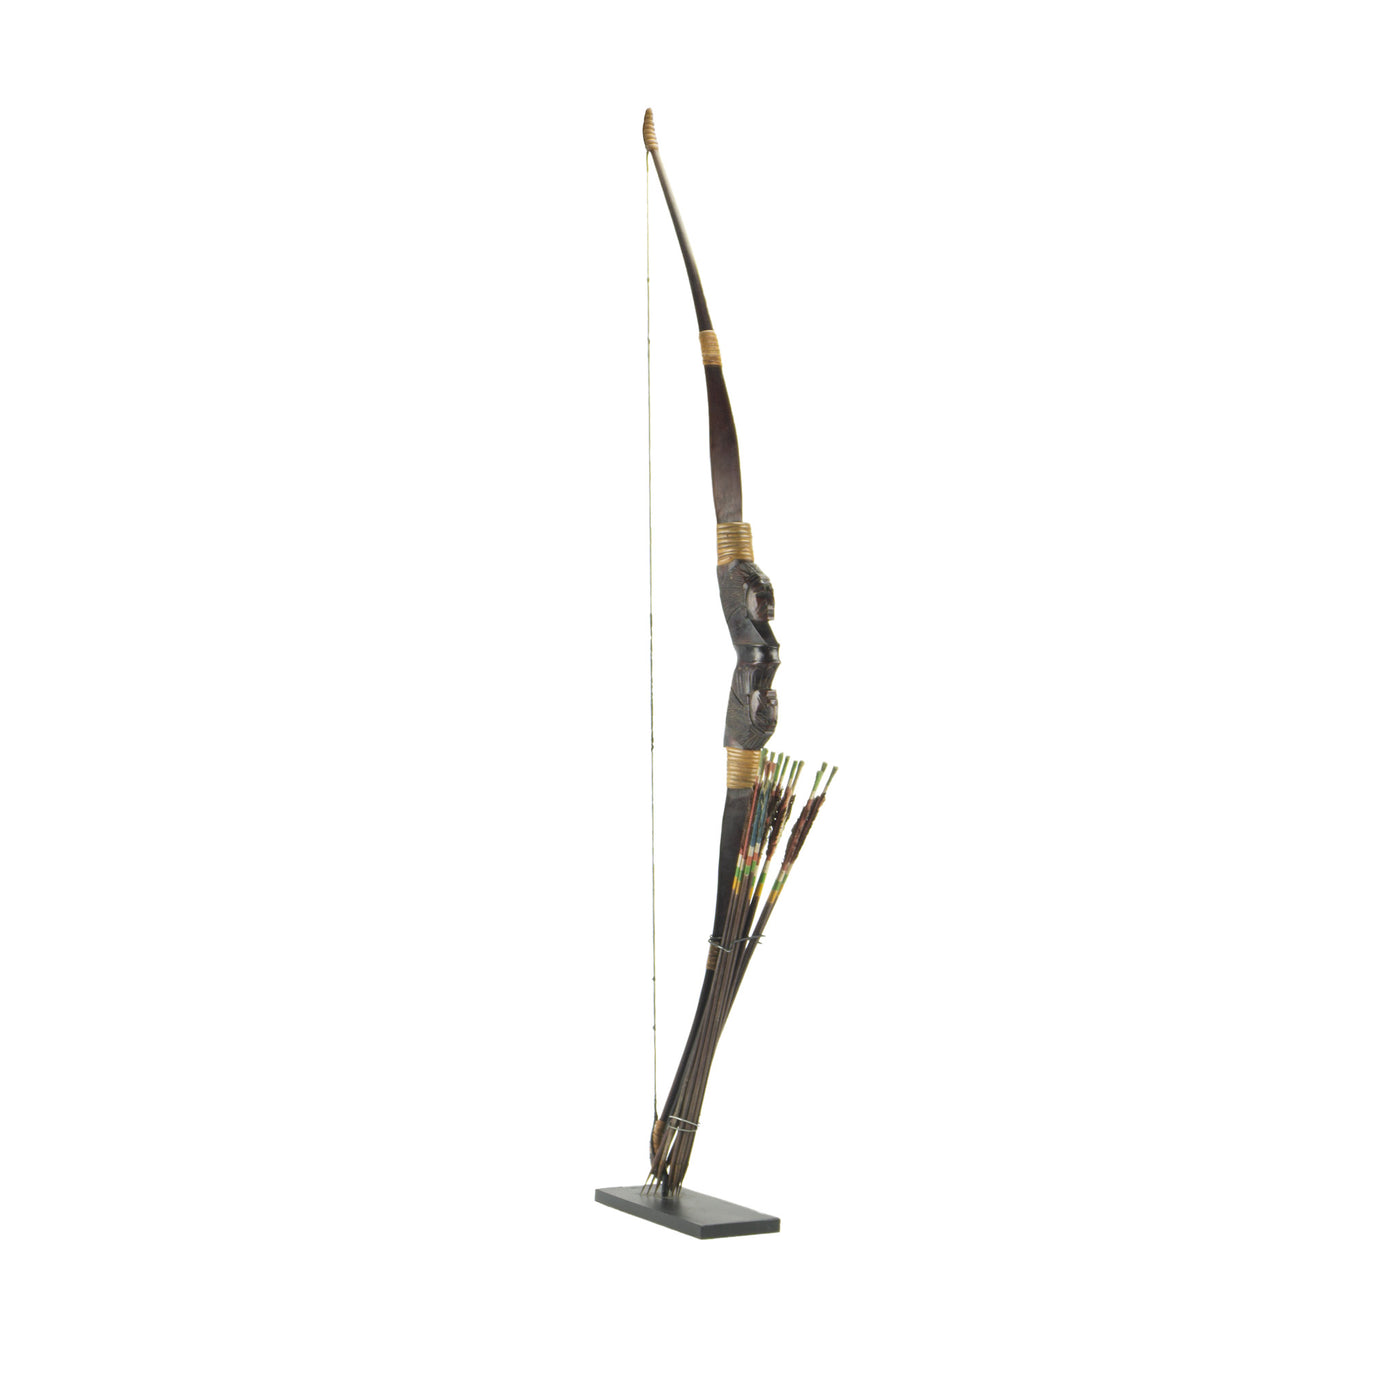 Dayak Wooden Bow and Arrow of Kalimantan